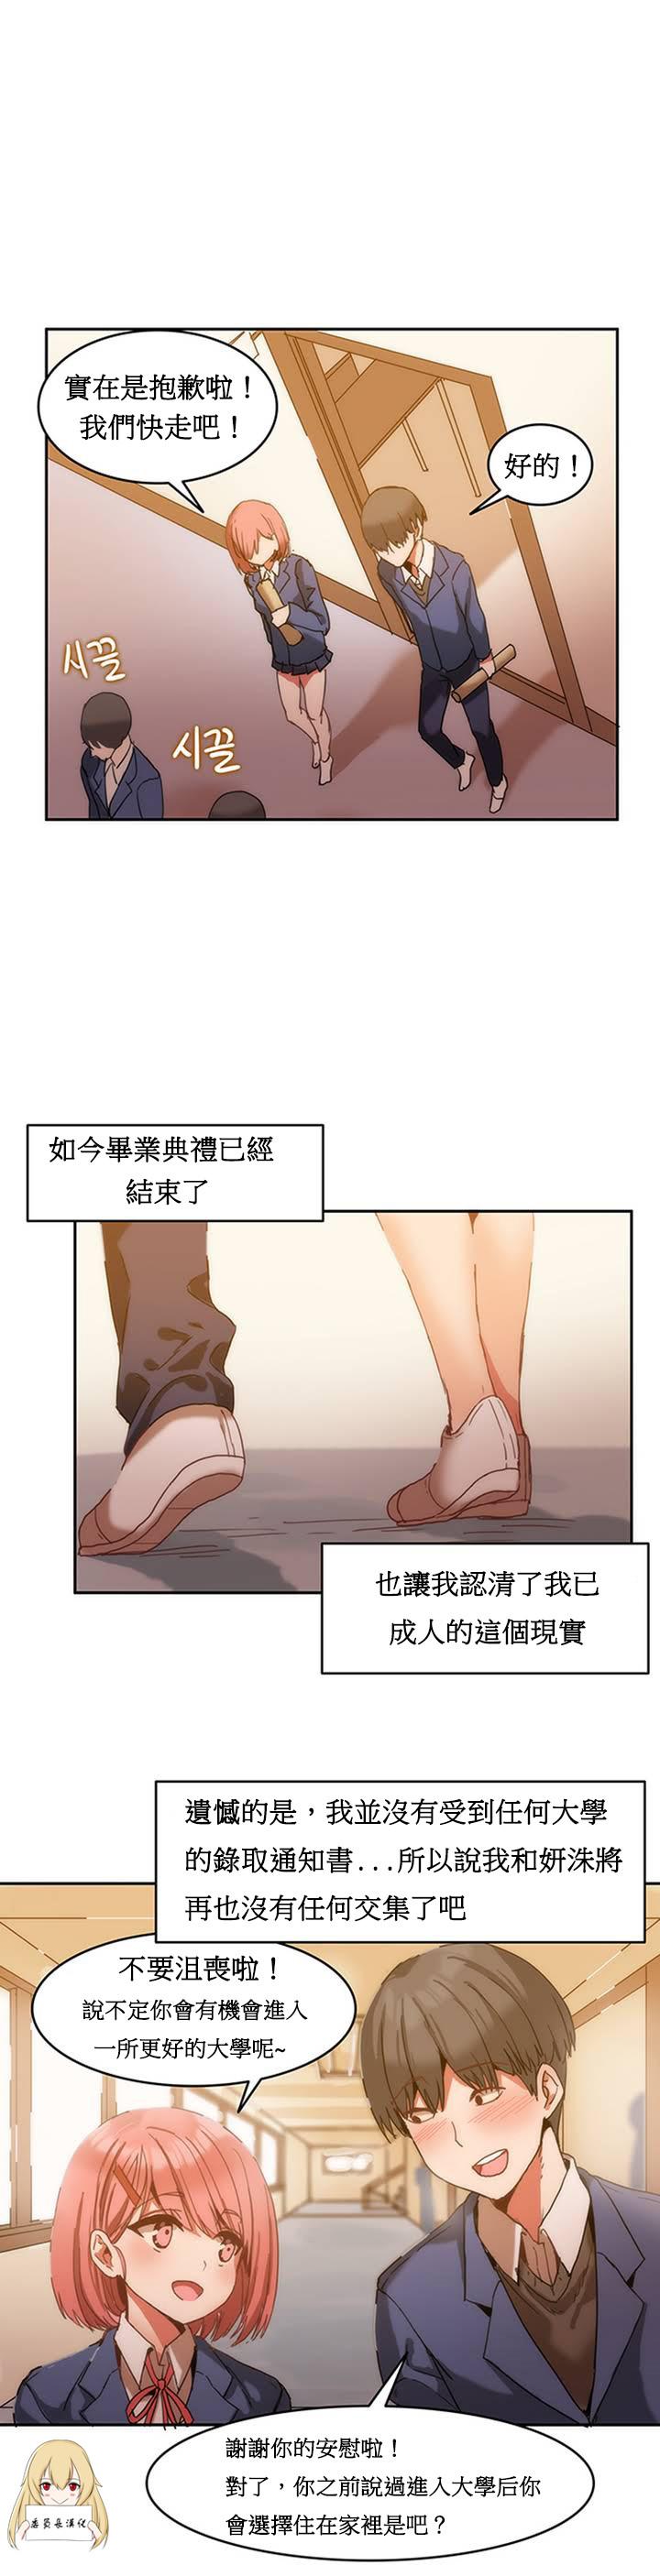 Cheat Hahri's Lumpy Boardhouse Ch. 1~12【委員長個人漢化】（持續更新） Panty - Page 6